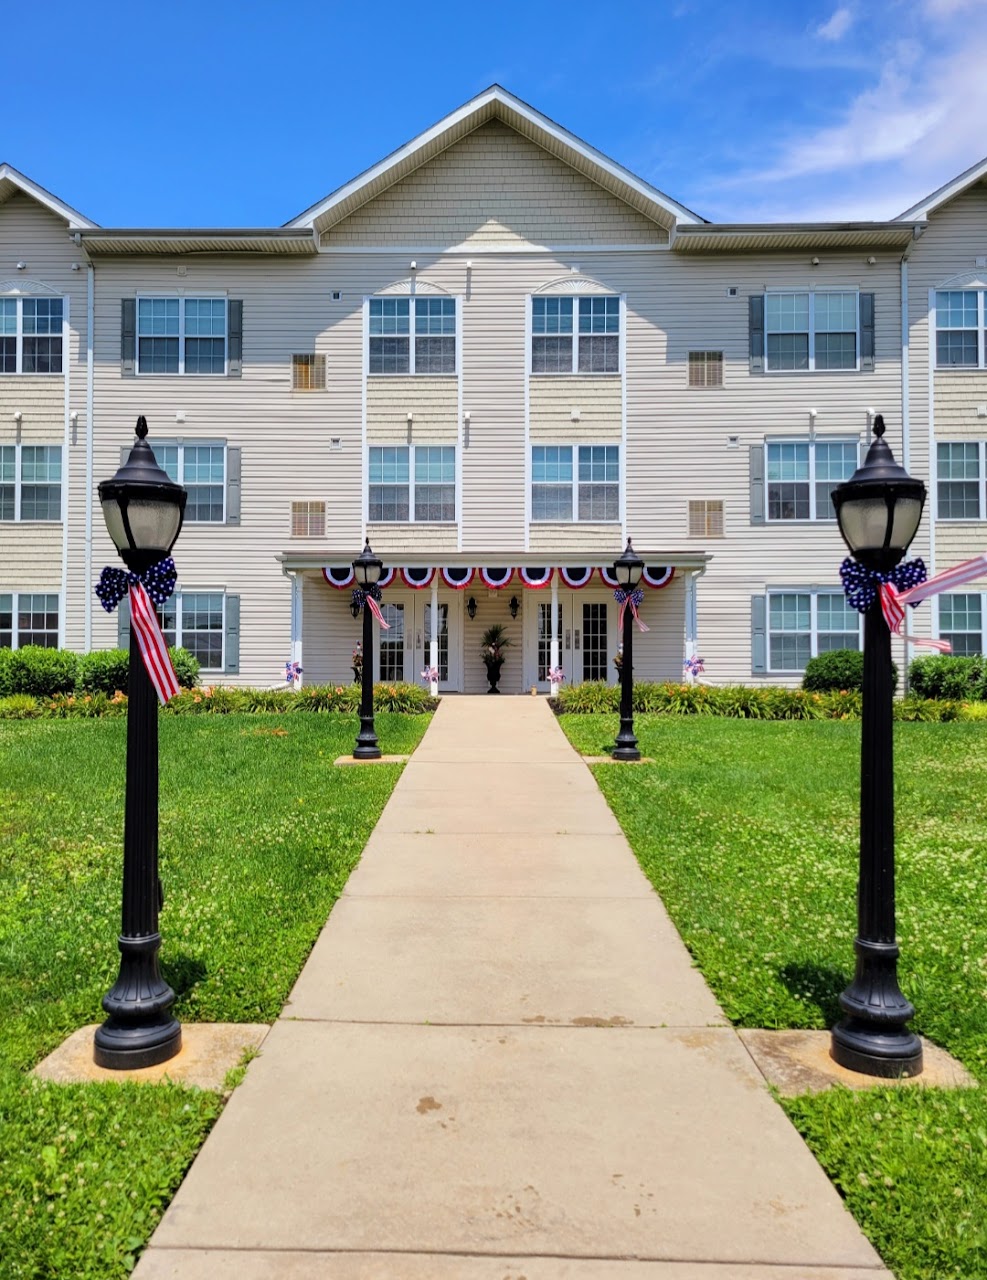 Photo of LITC #716 - BELLMAWR SENIOR HOUSING. Affordable housing located at 255 W BROWNING RD BELLMAWR, NJ 08031